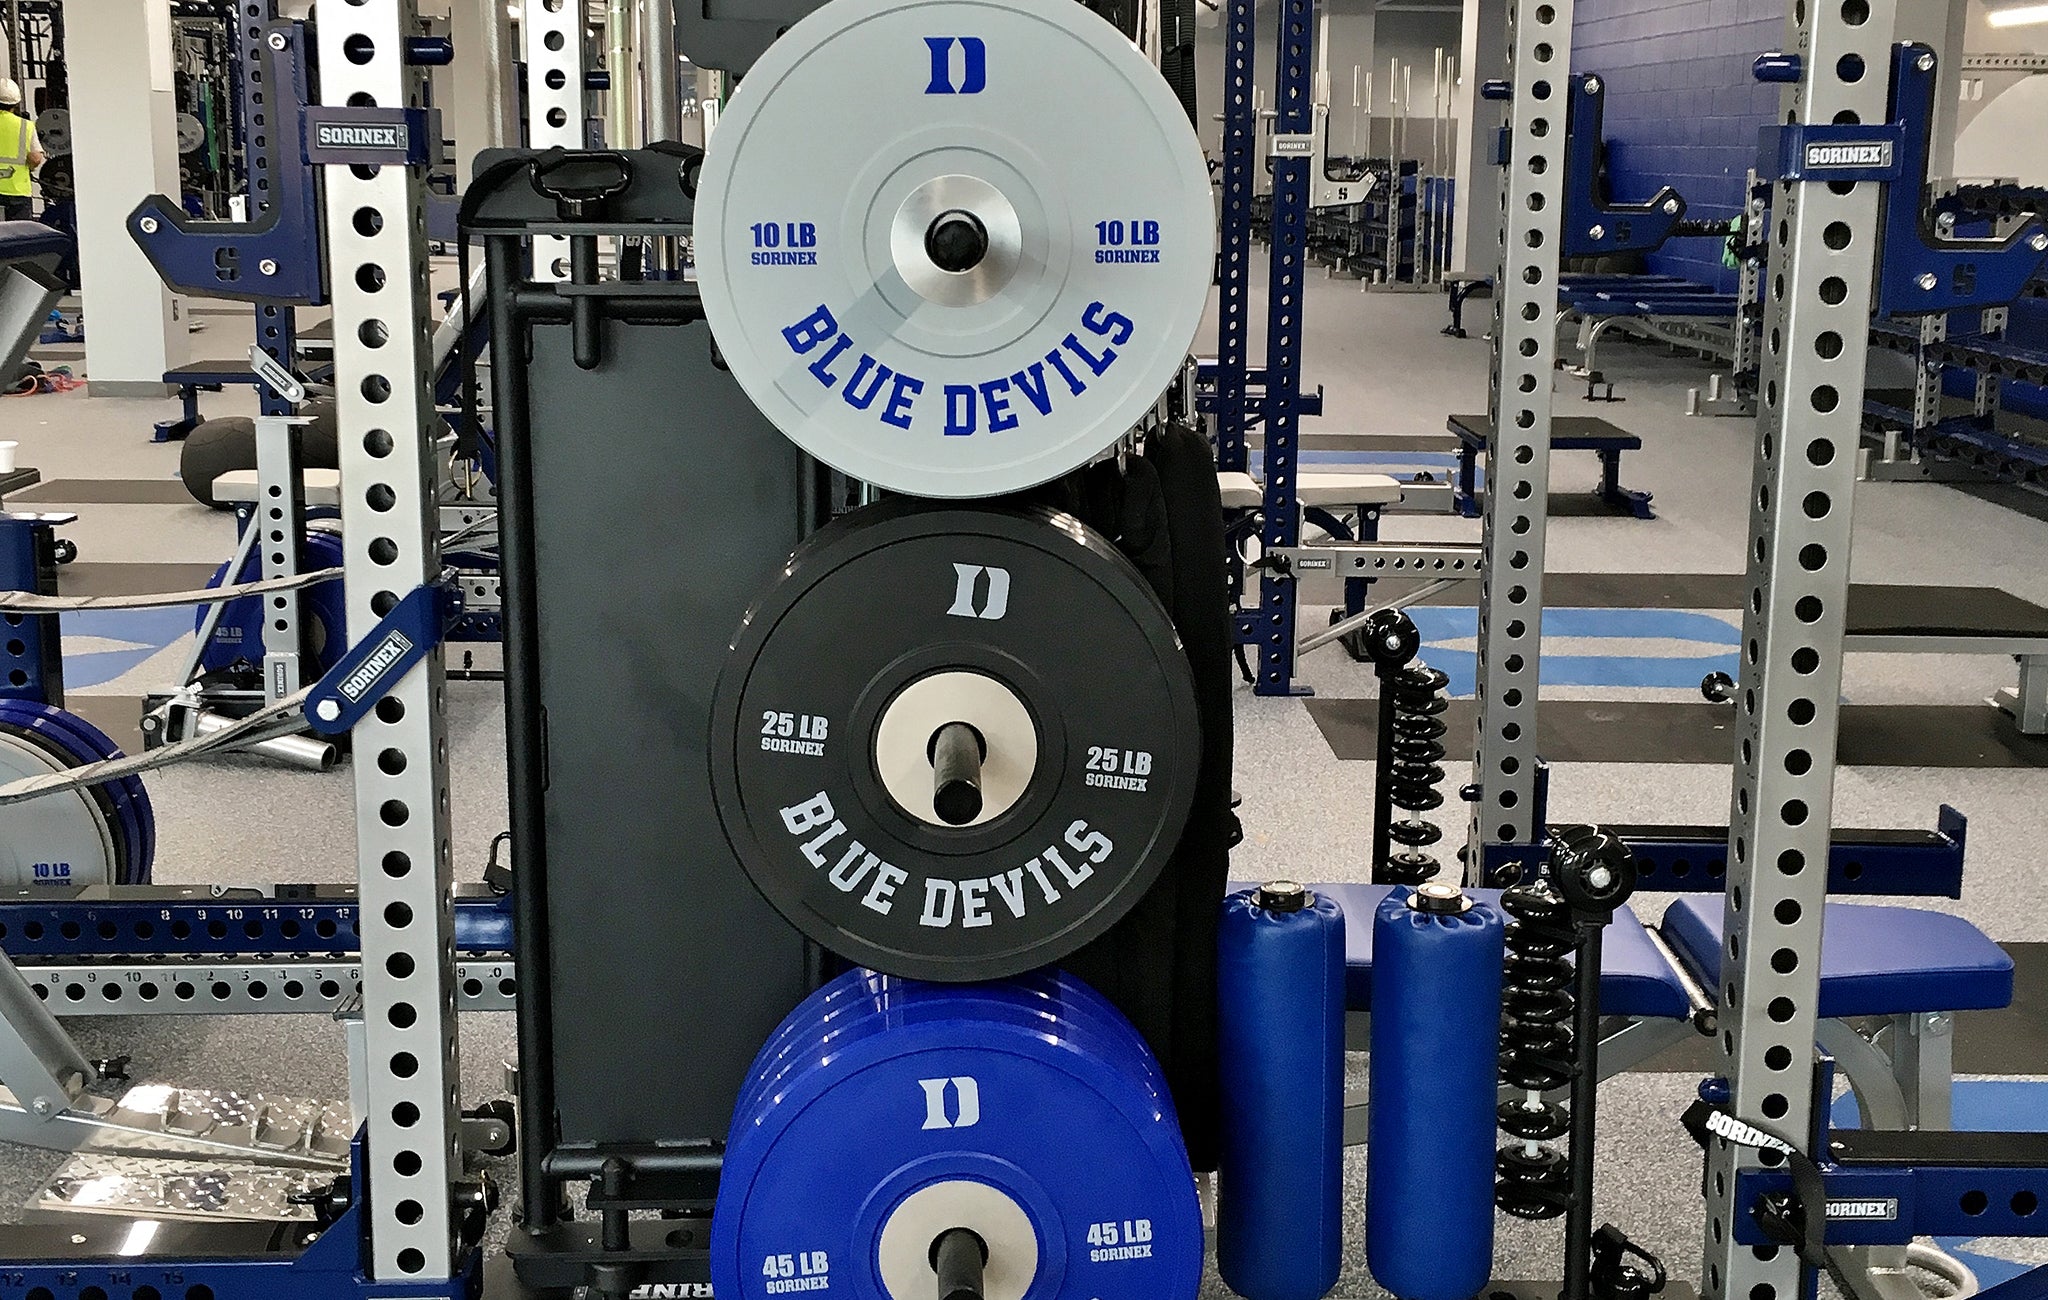 Duke strength and conditioning